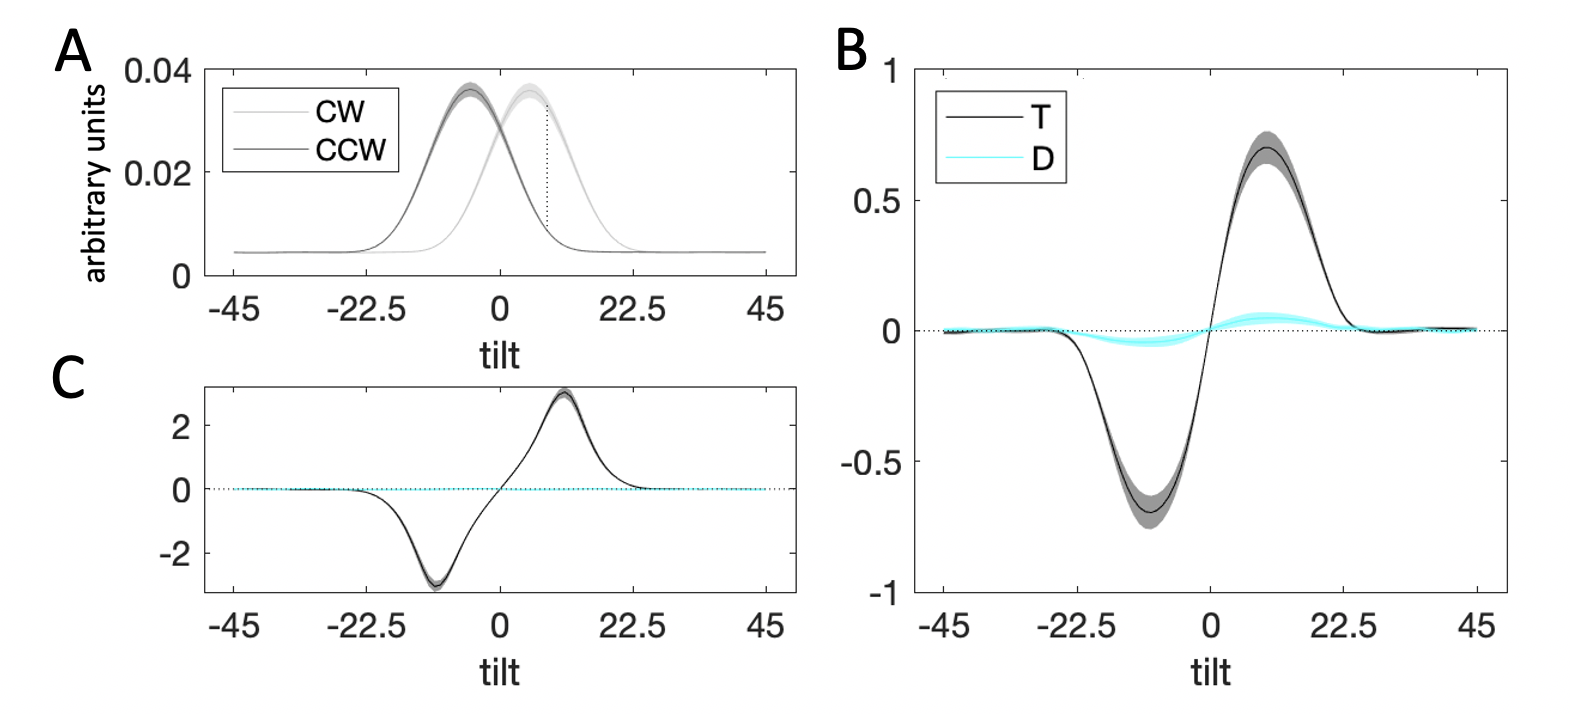 Decision kernel results. Plots are as in Experiment 1. $\textbf{A:}$ Average stimulus energy profiles. $\textbf{B:}$ Decision kernel based on participant choices. $\textbf{C:}$ Decision kernel based on ground truth stimulus tilts.